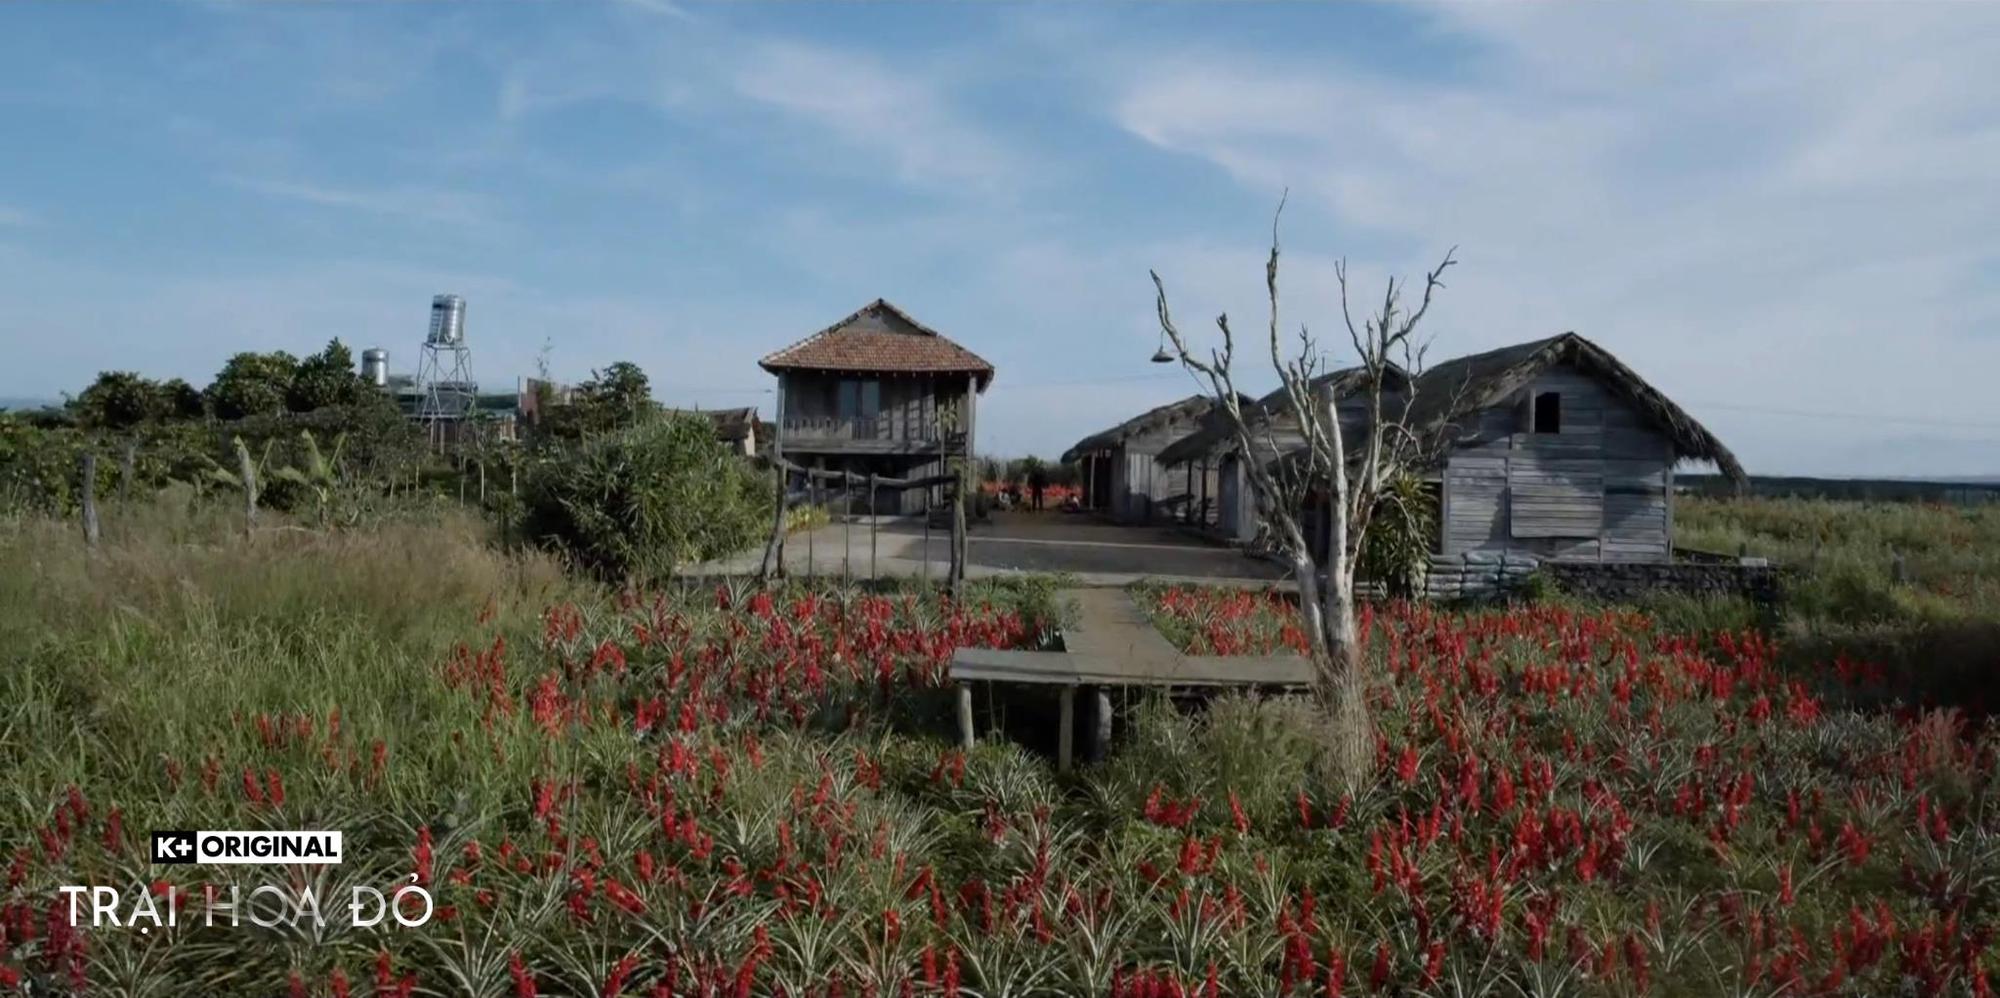 Red Flower Camp: Impressive pitch, clearly depicting Victor Vu's bold thriller world - Photo 2.